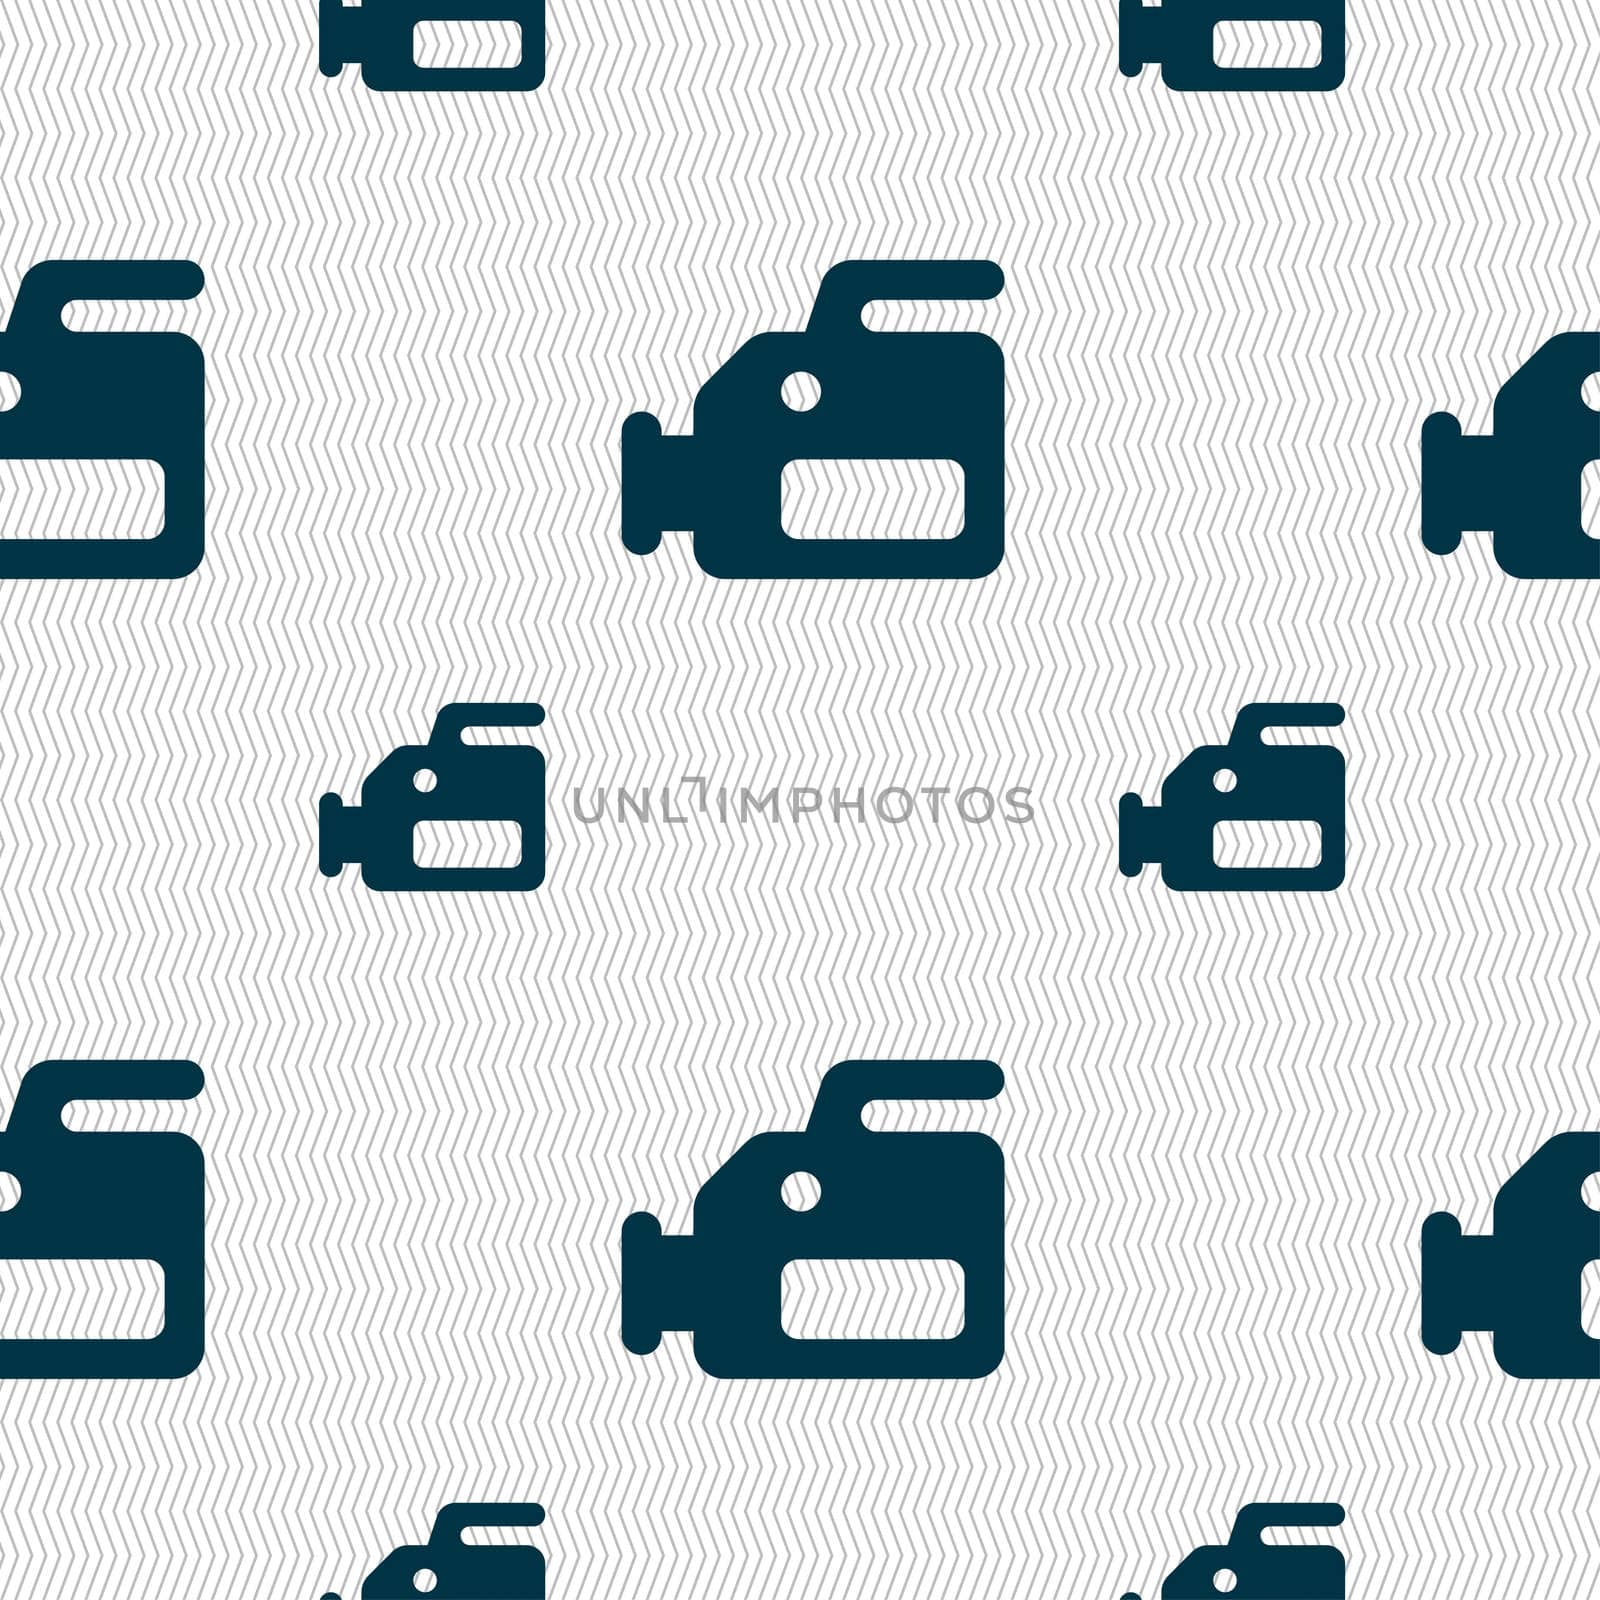 video camera icon sign. Seamless pattern with geometric texture. illustration